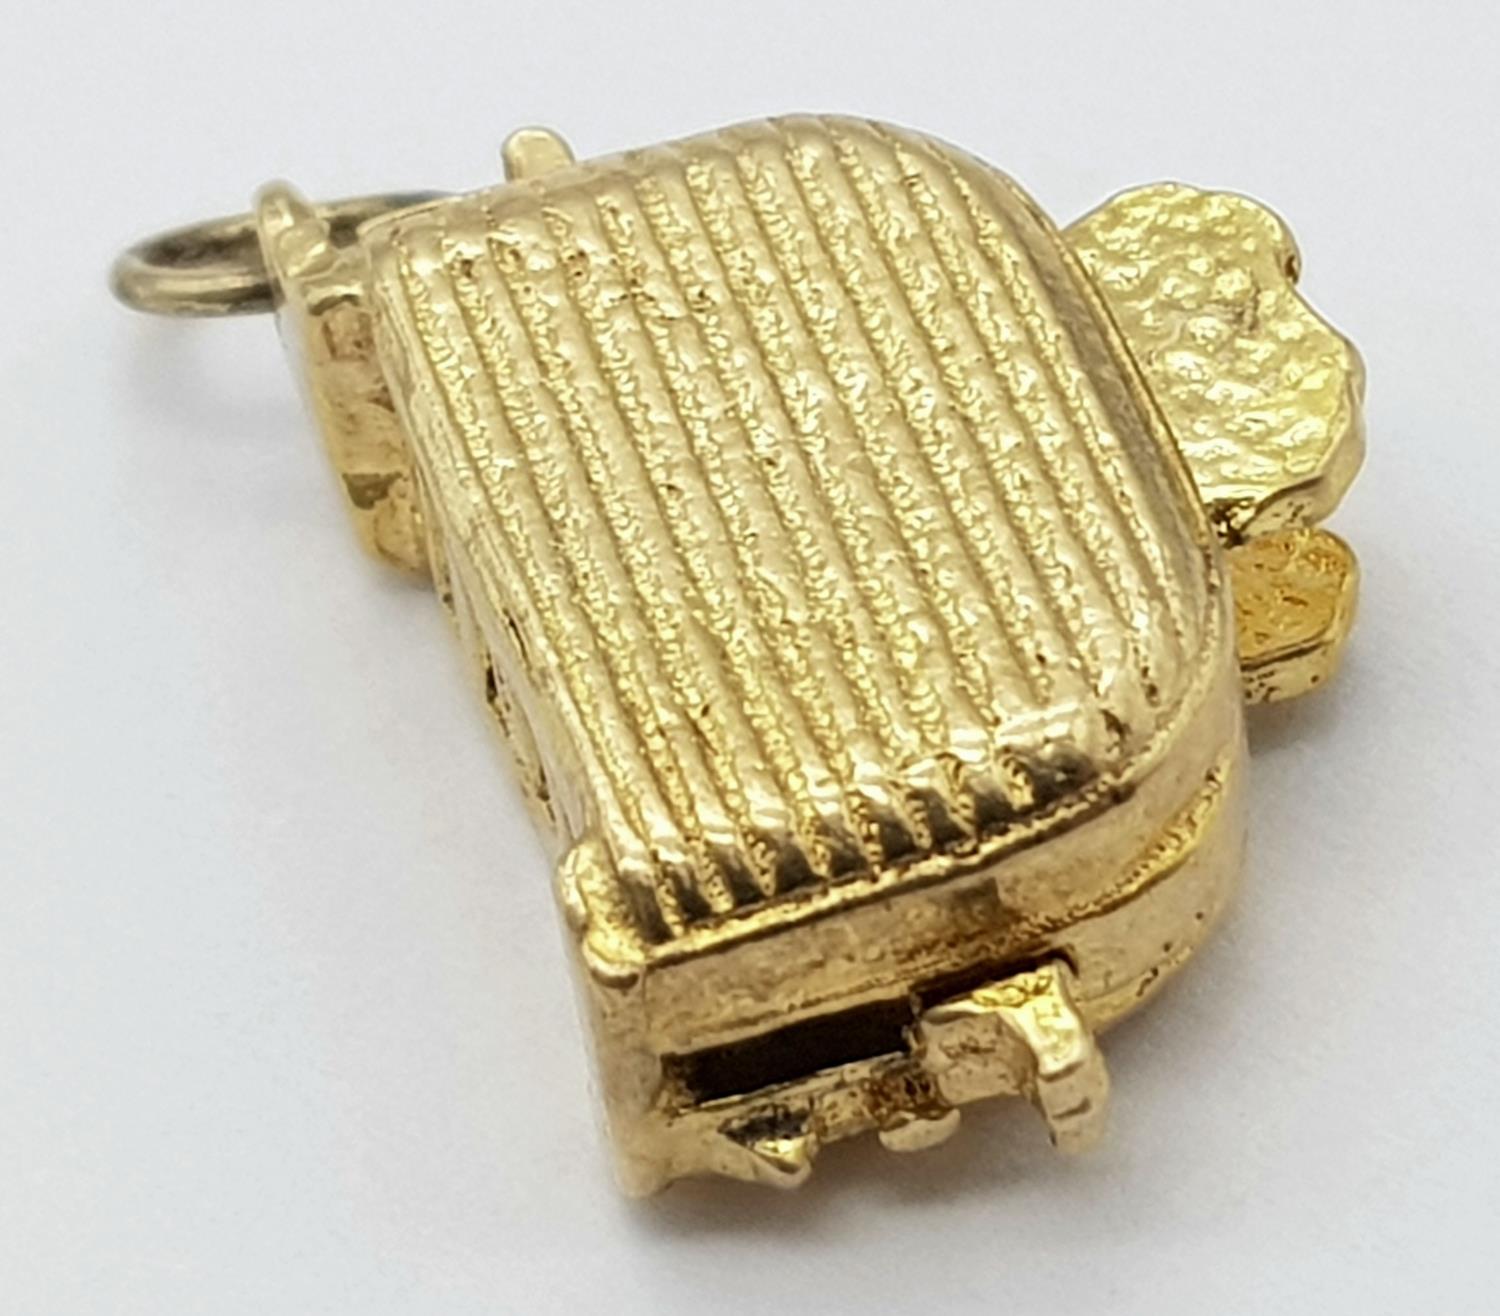 A 9K YELLOW GOLD TOASTER CHARM, WHICH HAS TOAST THAT YOU CAN FLIP OUT VERY CUTE 5.5G , approx 20mm x - Image 2 of 5